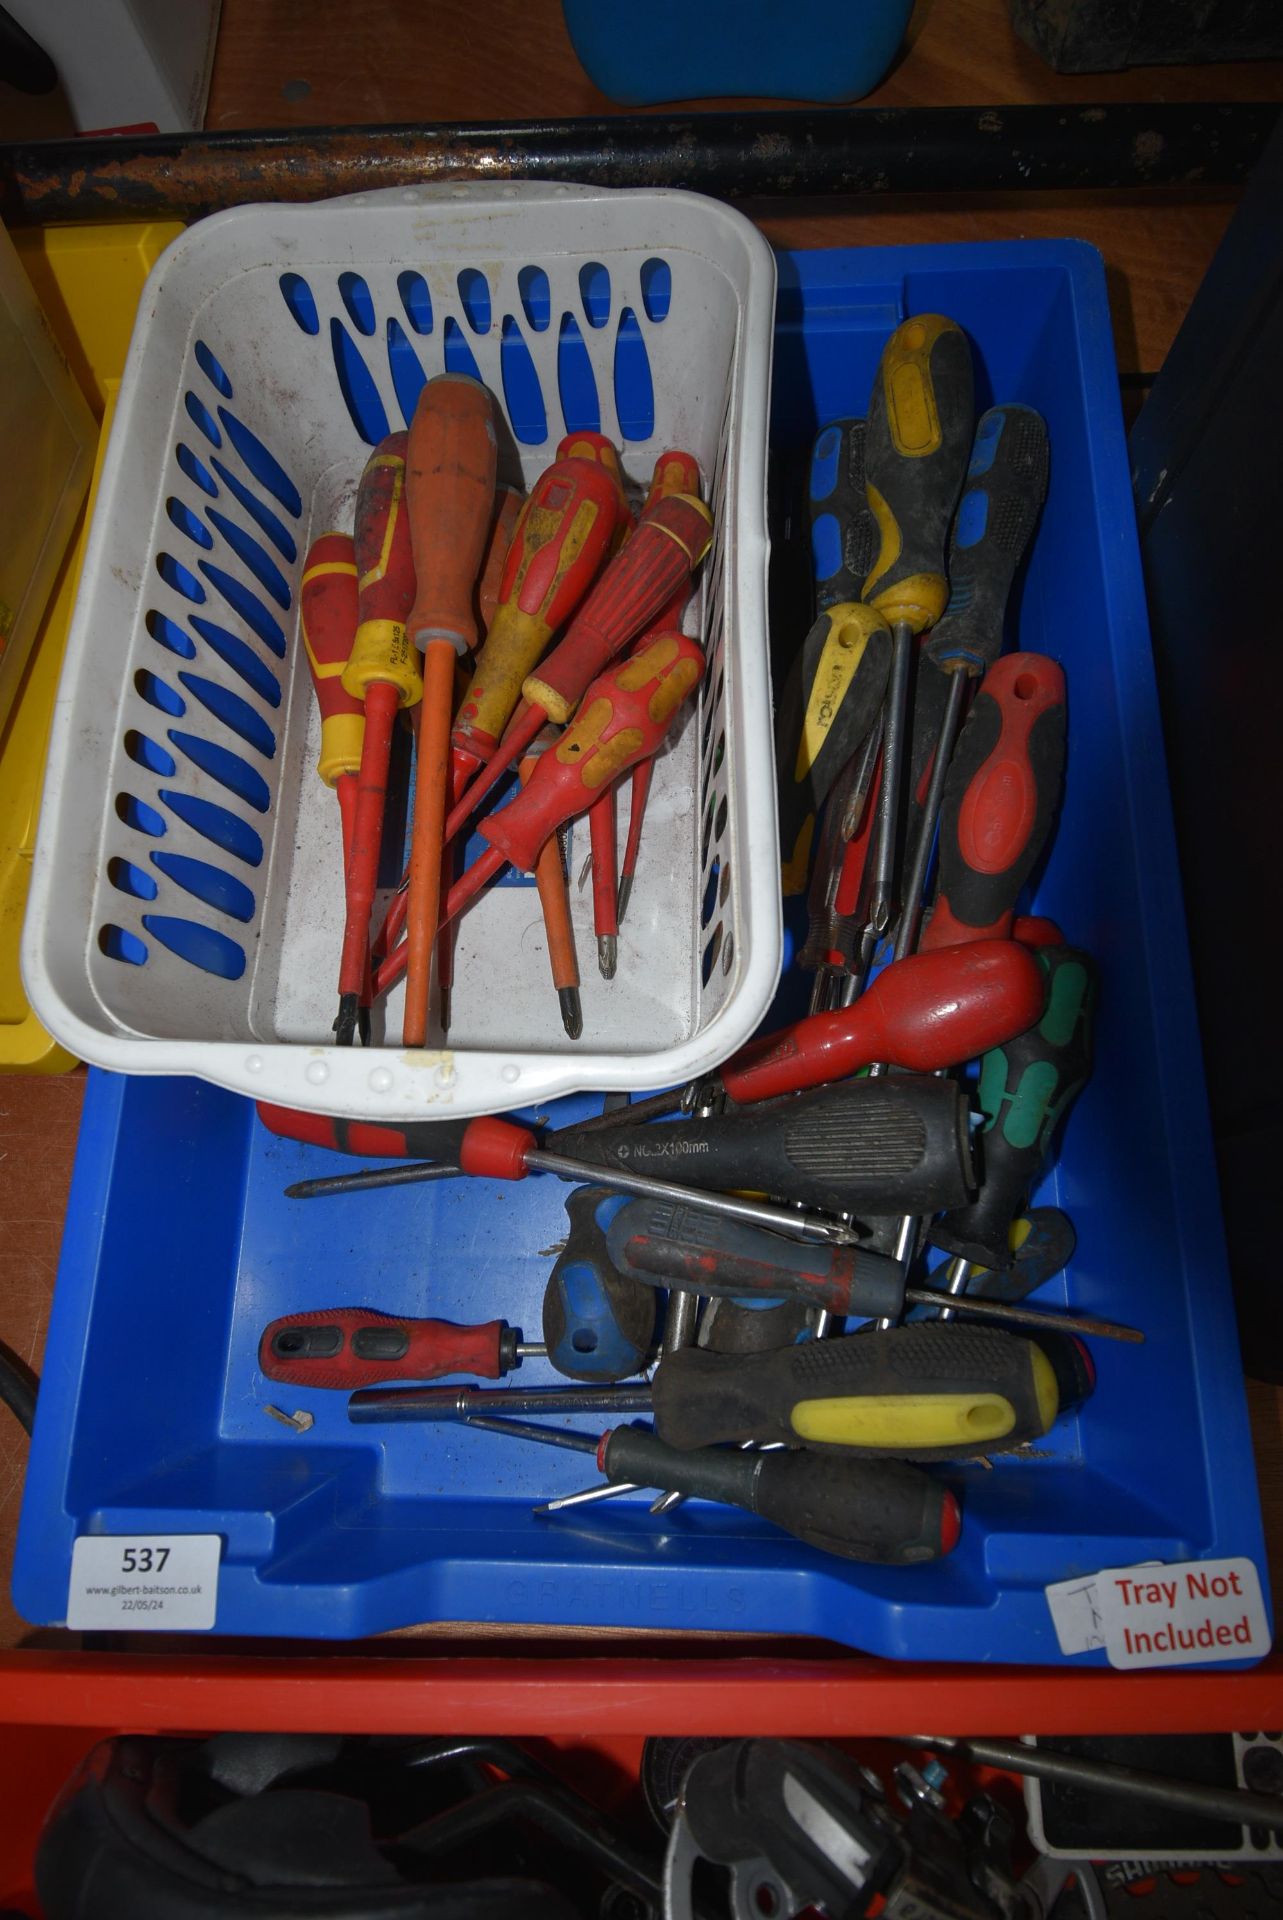 Quantity of Electricians and Other Screwdrivers (tray not included)